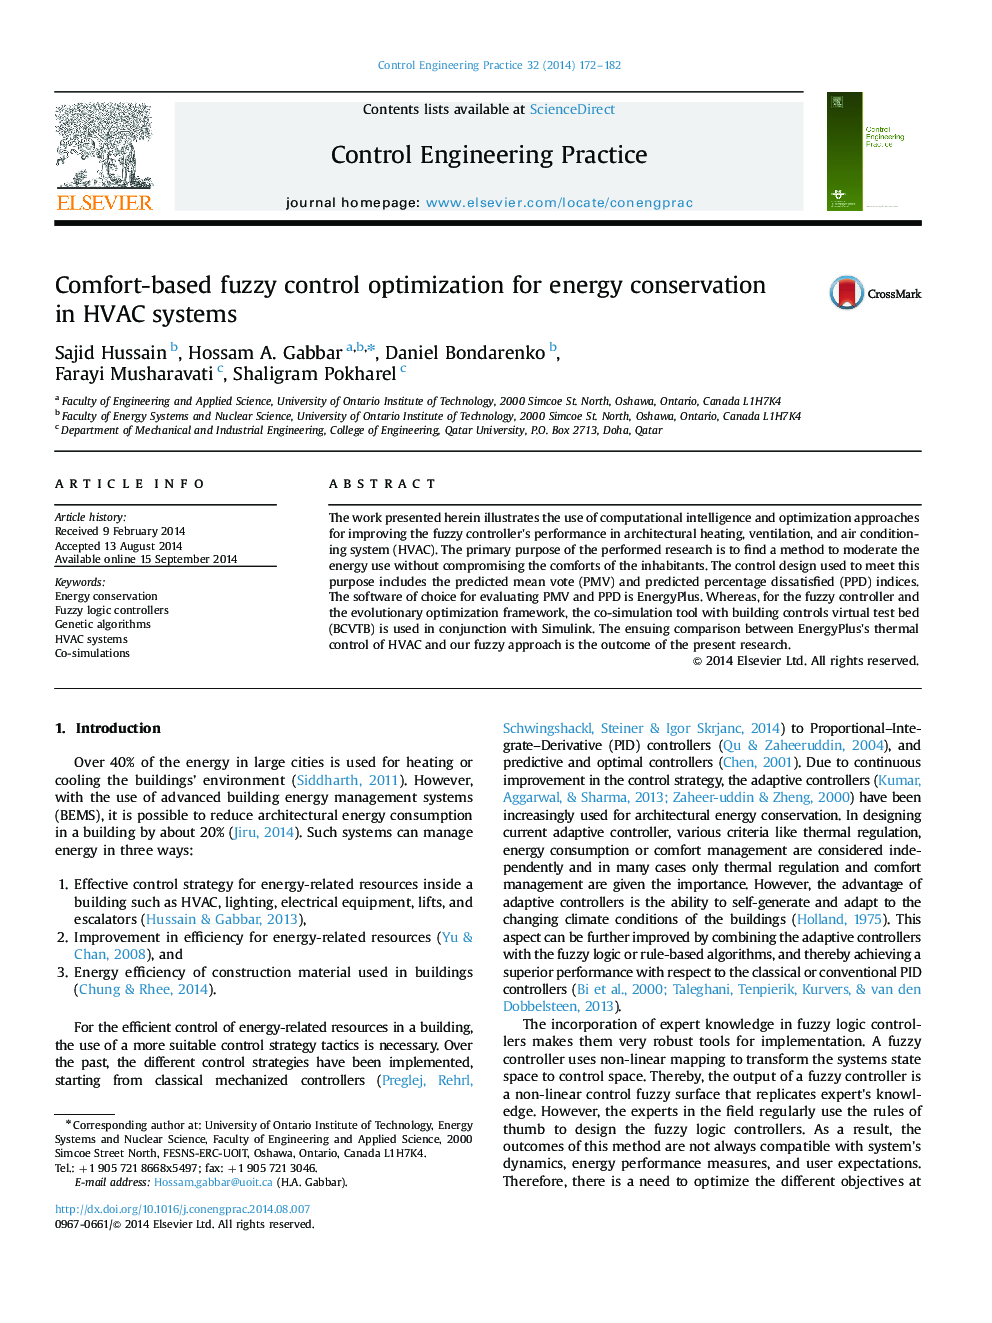 Comfort-based fuzzy control optimization for energy conservation in HVAC systems